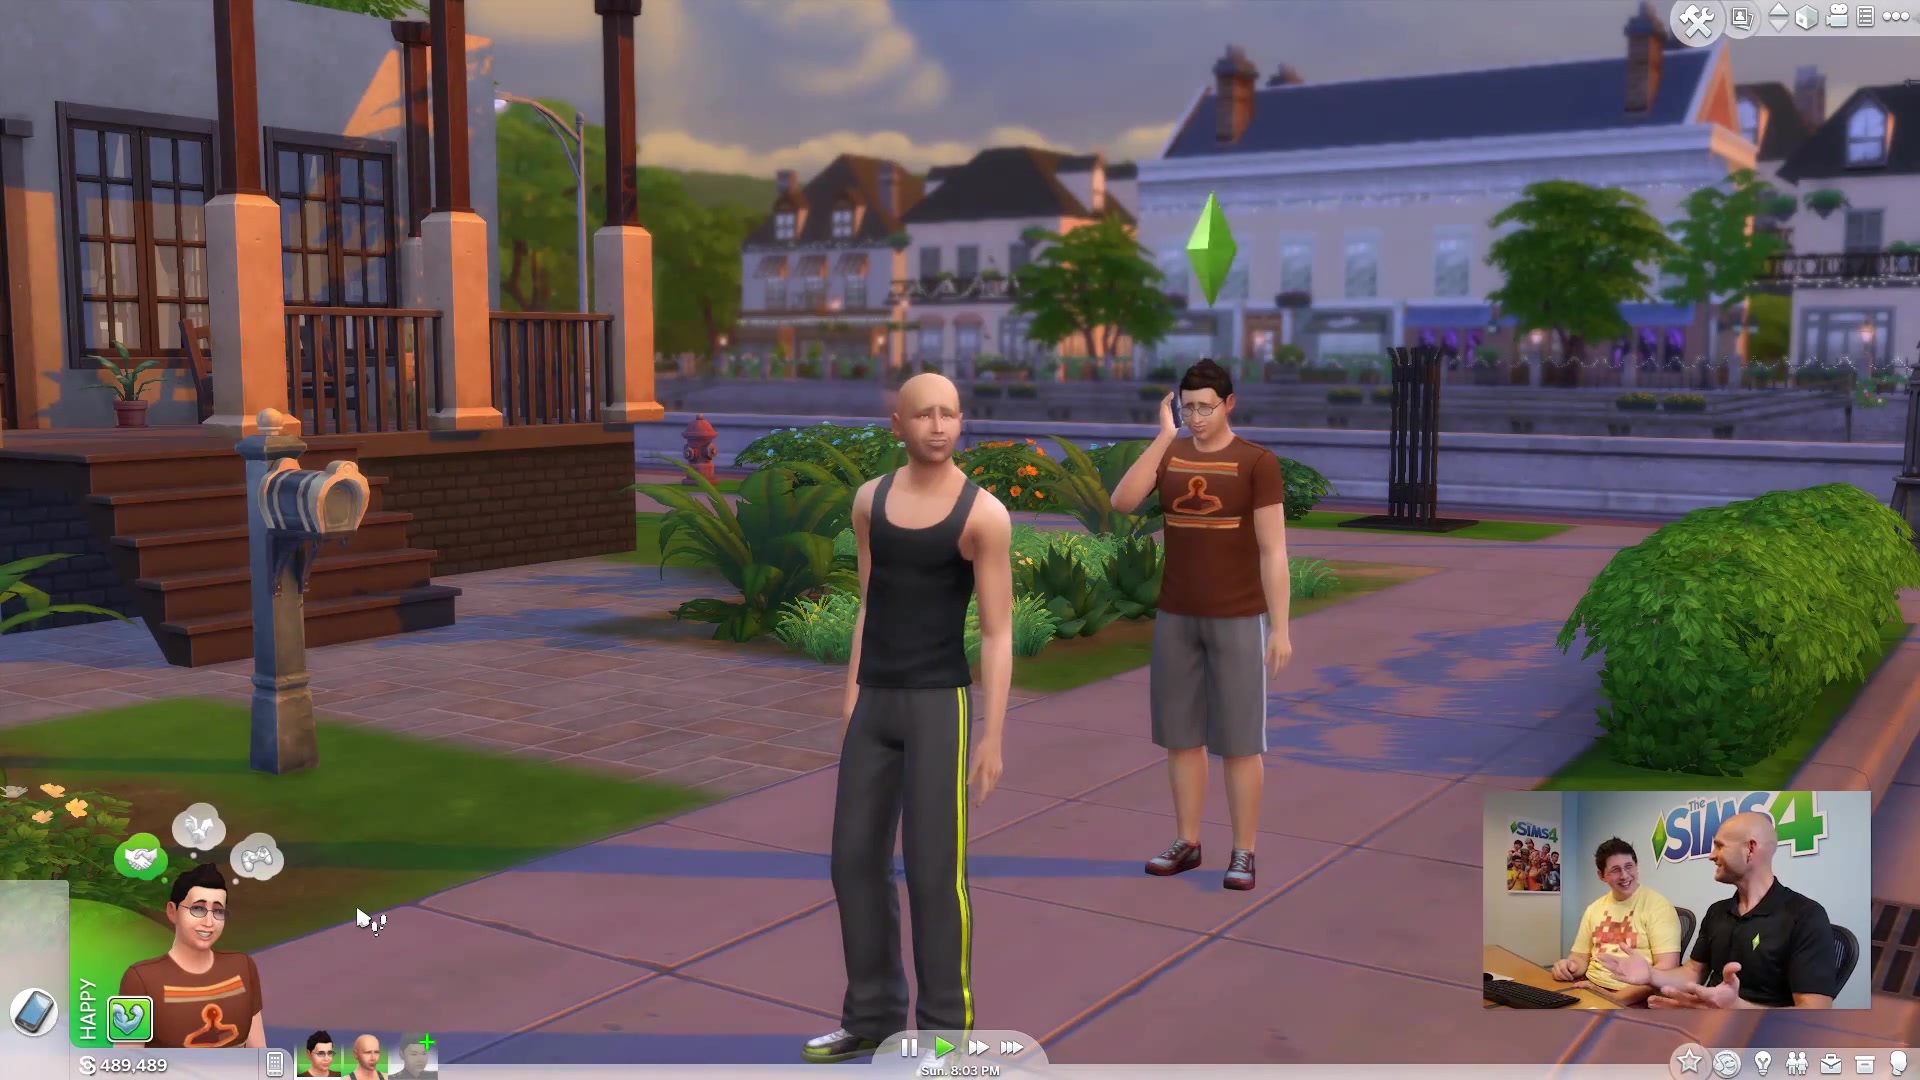 Sims 4 download